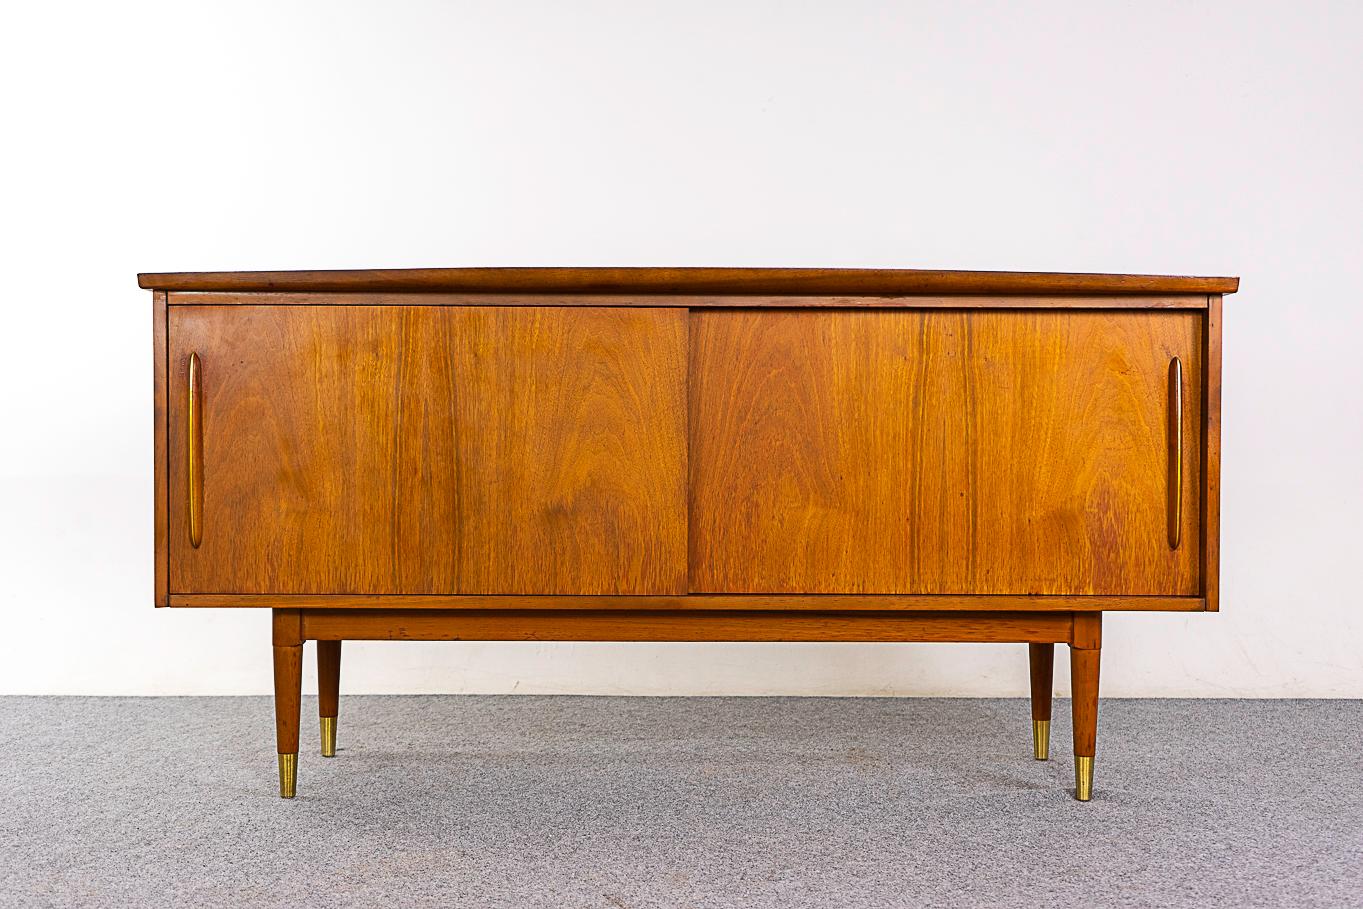 Walnut mid-century sideboard by Deilcraft, circa 1960's. Solid overhanging curved edges, sleek handles with metal inlay and tapering capped legs! Sliding doors open to a slim cutlery drawer and 2 fixed height shelves. As is condition, minor wear and